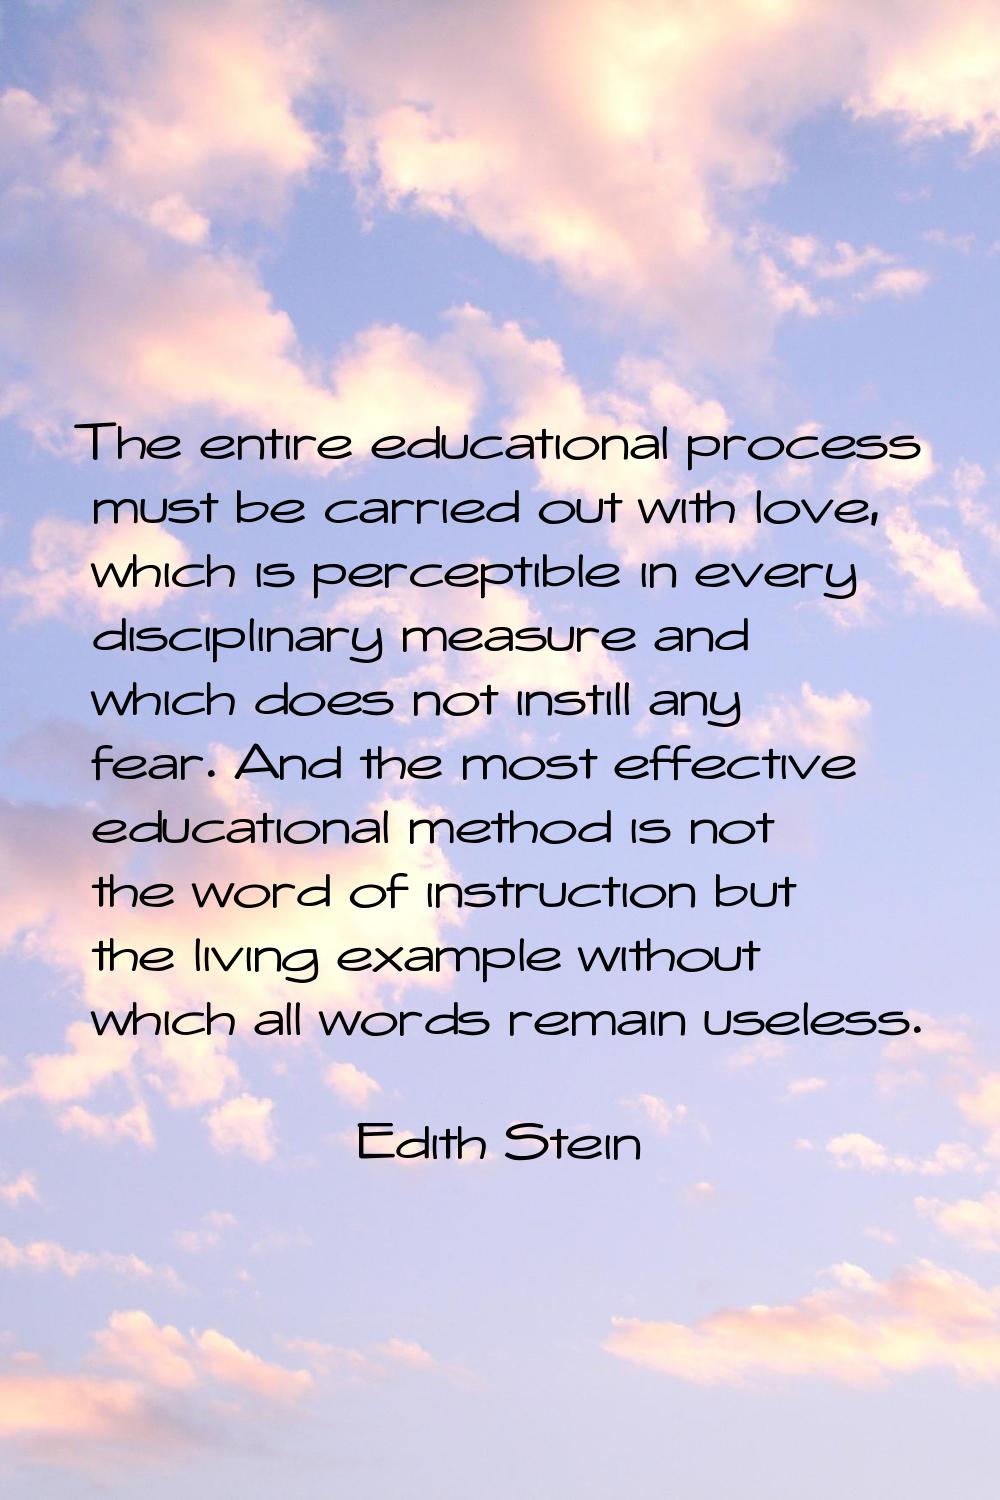 The entire educational process must be carried out with love, which is perceptible in every discipl